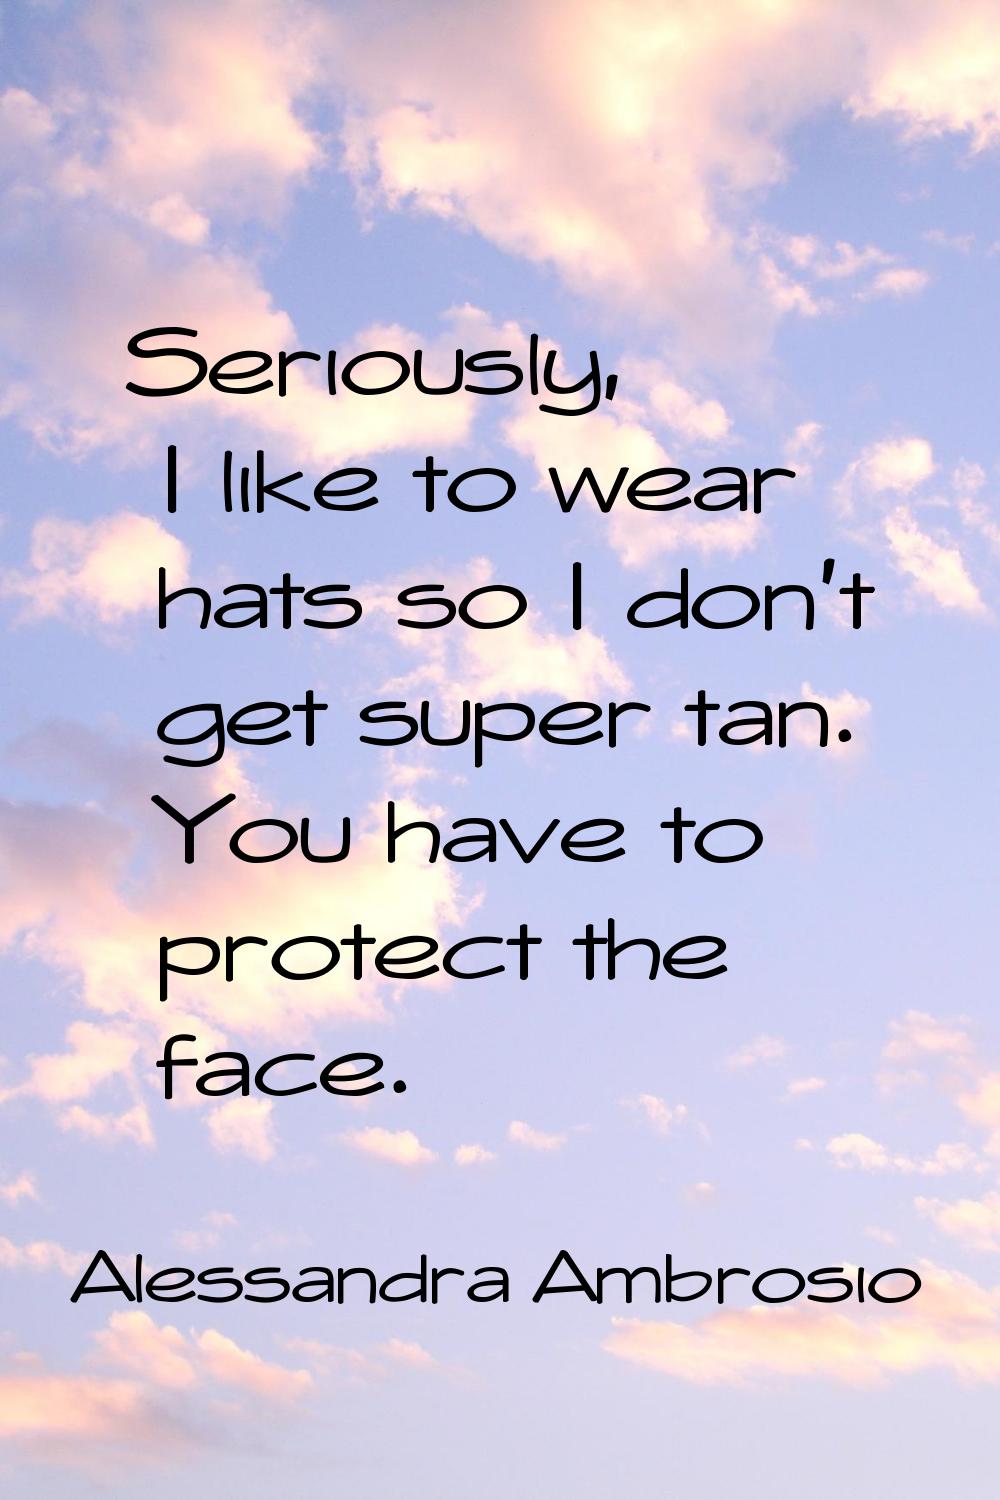 Seriously, I like to wear hats so I don't get super tan. You have to protect the face.